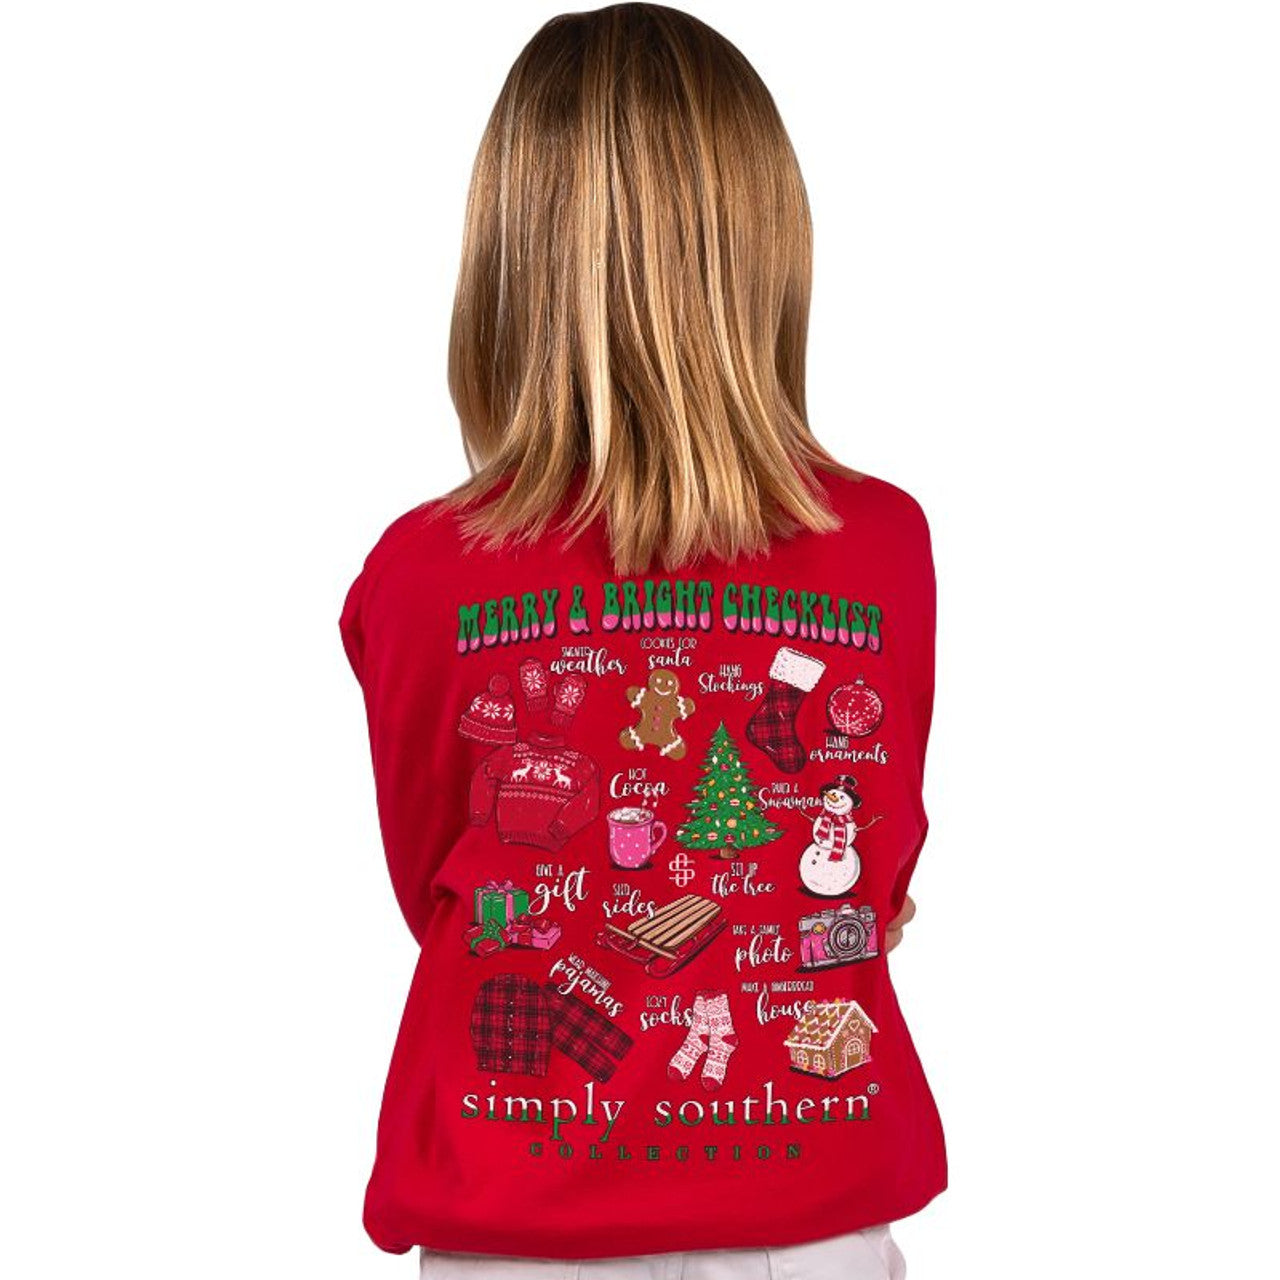 YOUTH - Simply Southern - Merry & Bright Checklist Long Sleeve Tee